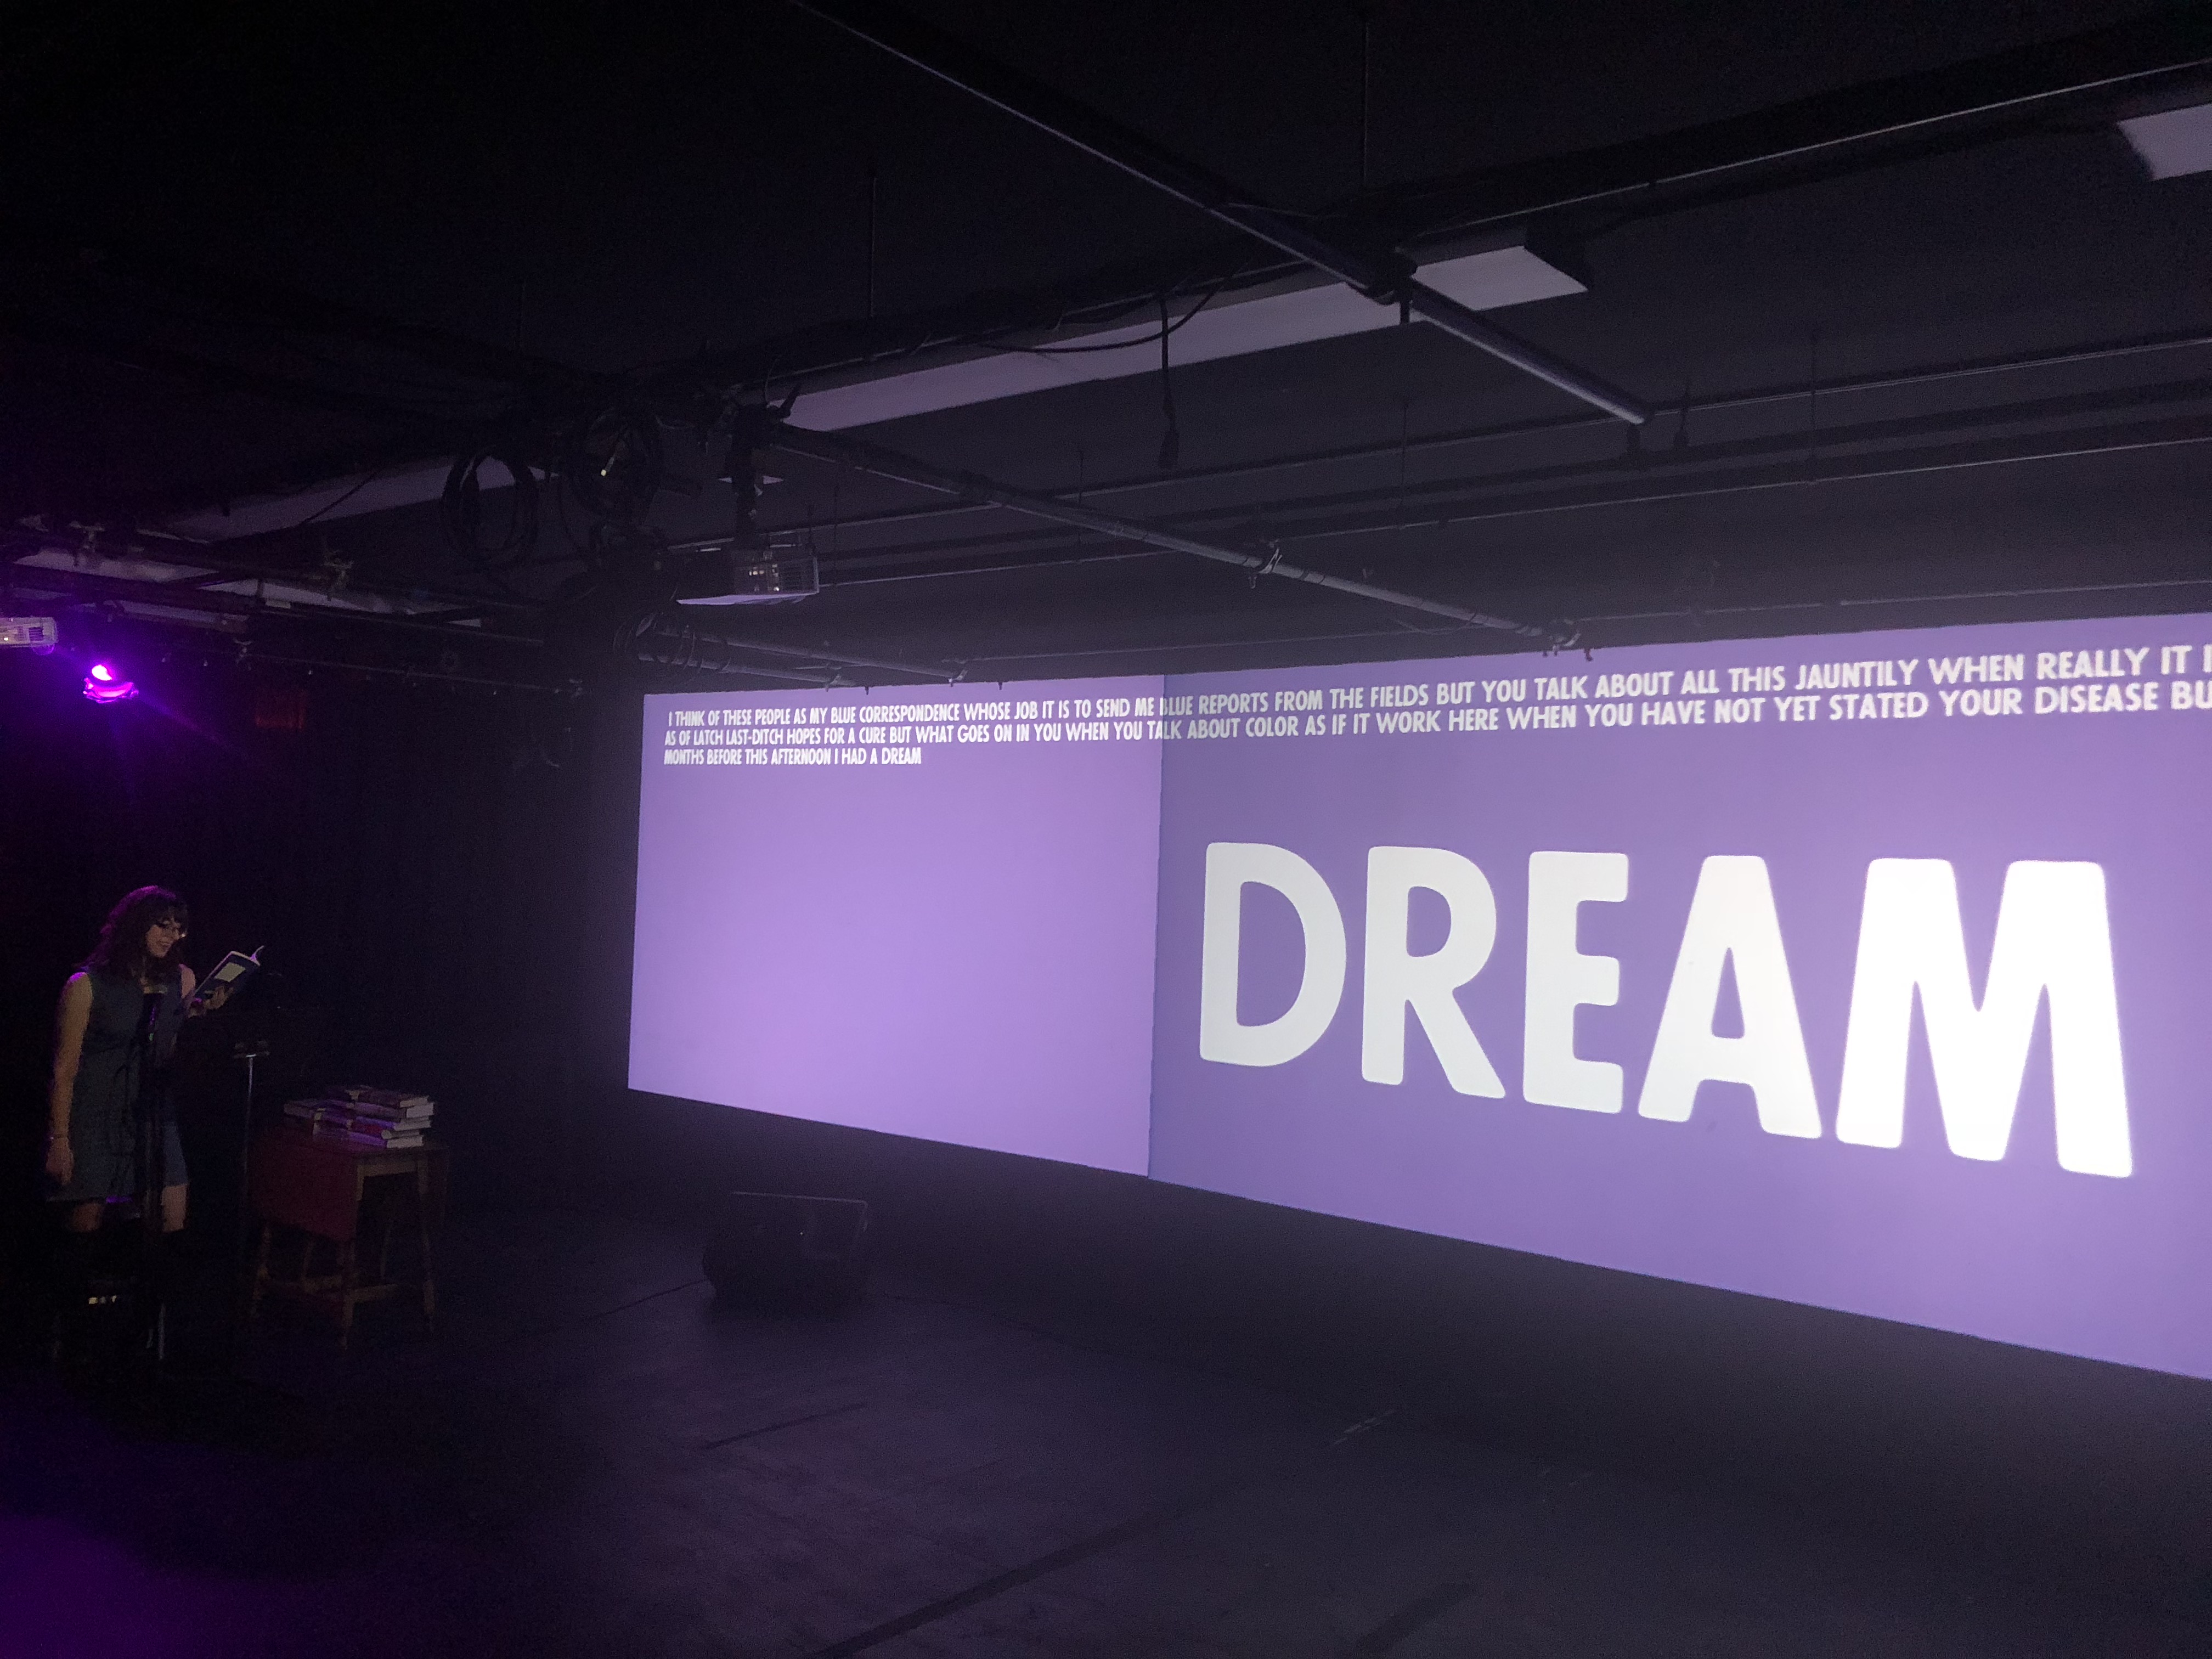 The word DREAM projected large with a purple background